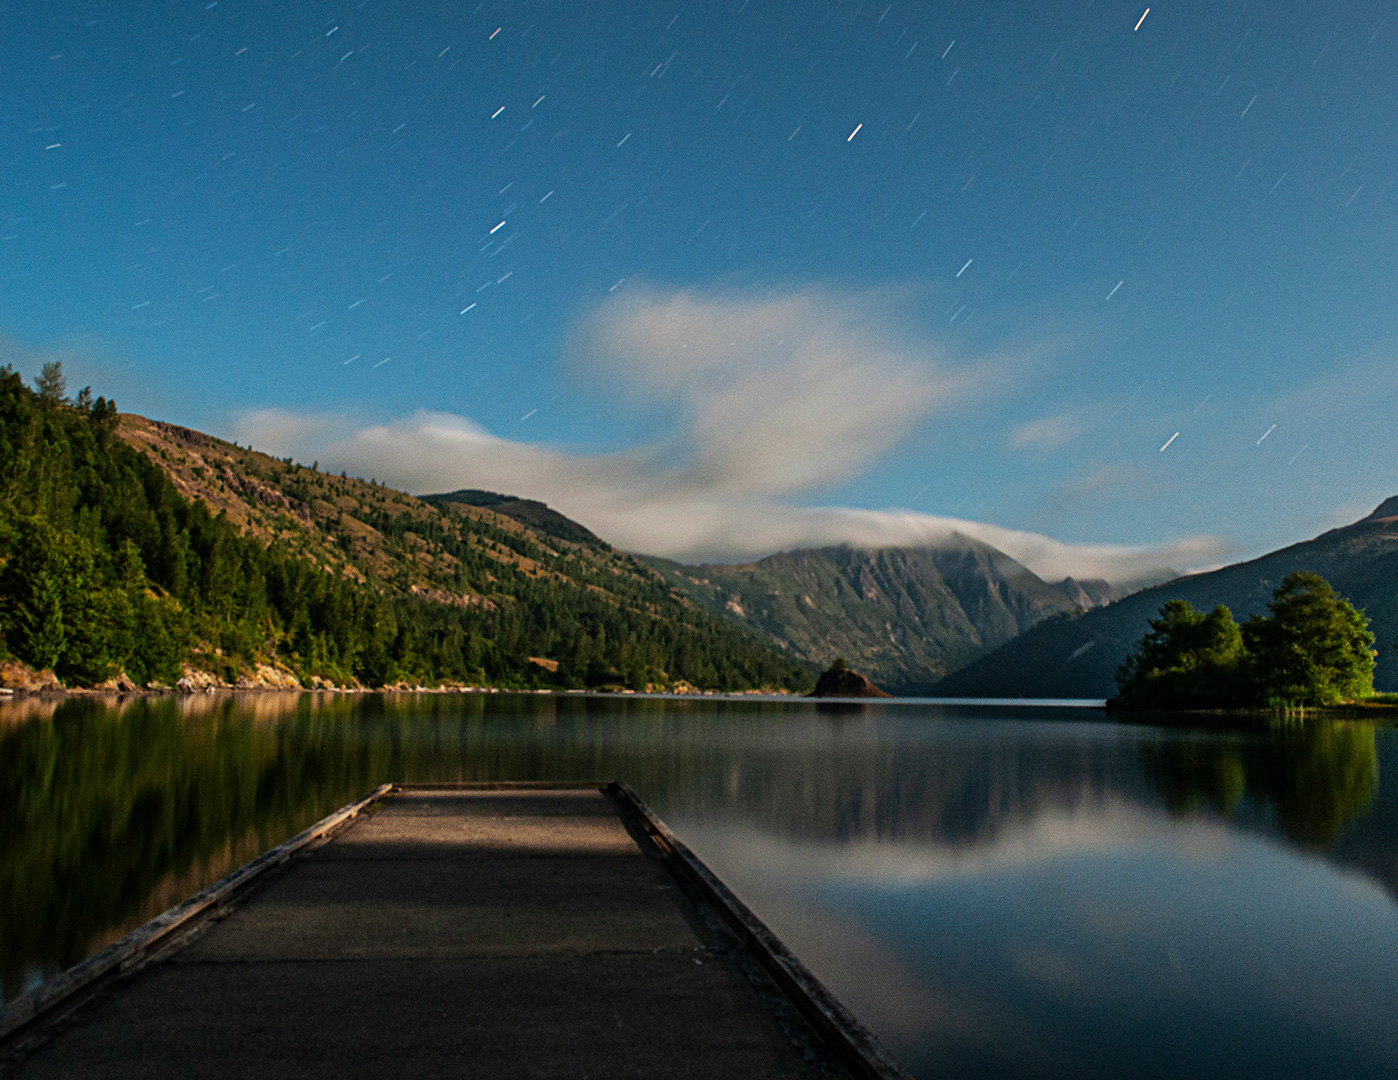 The boat dock at Coldwater lake juts into calm water below a clear starry sky.